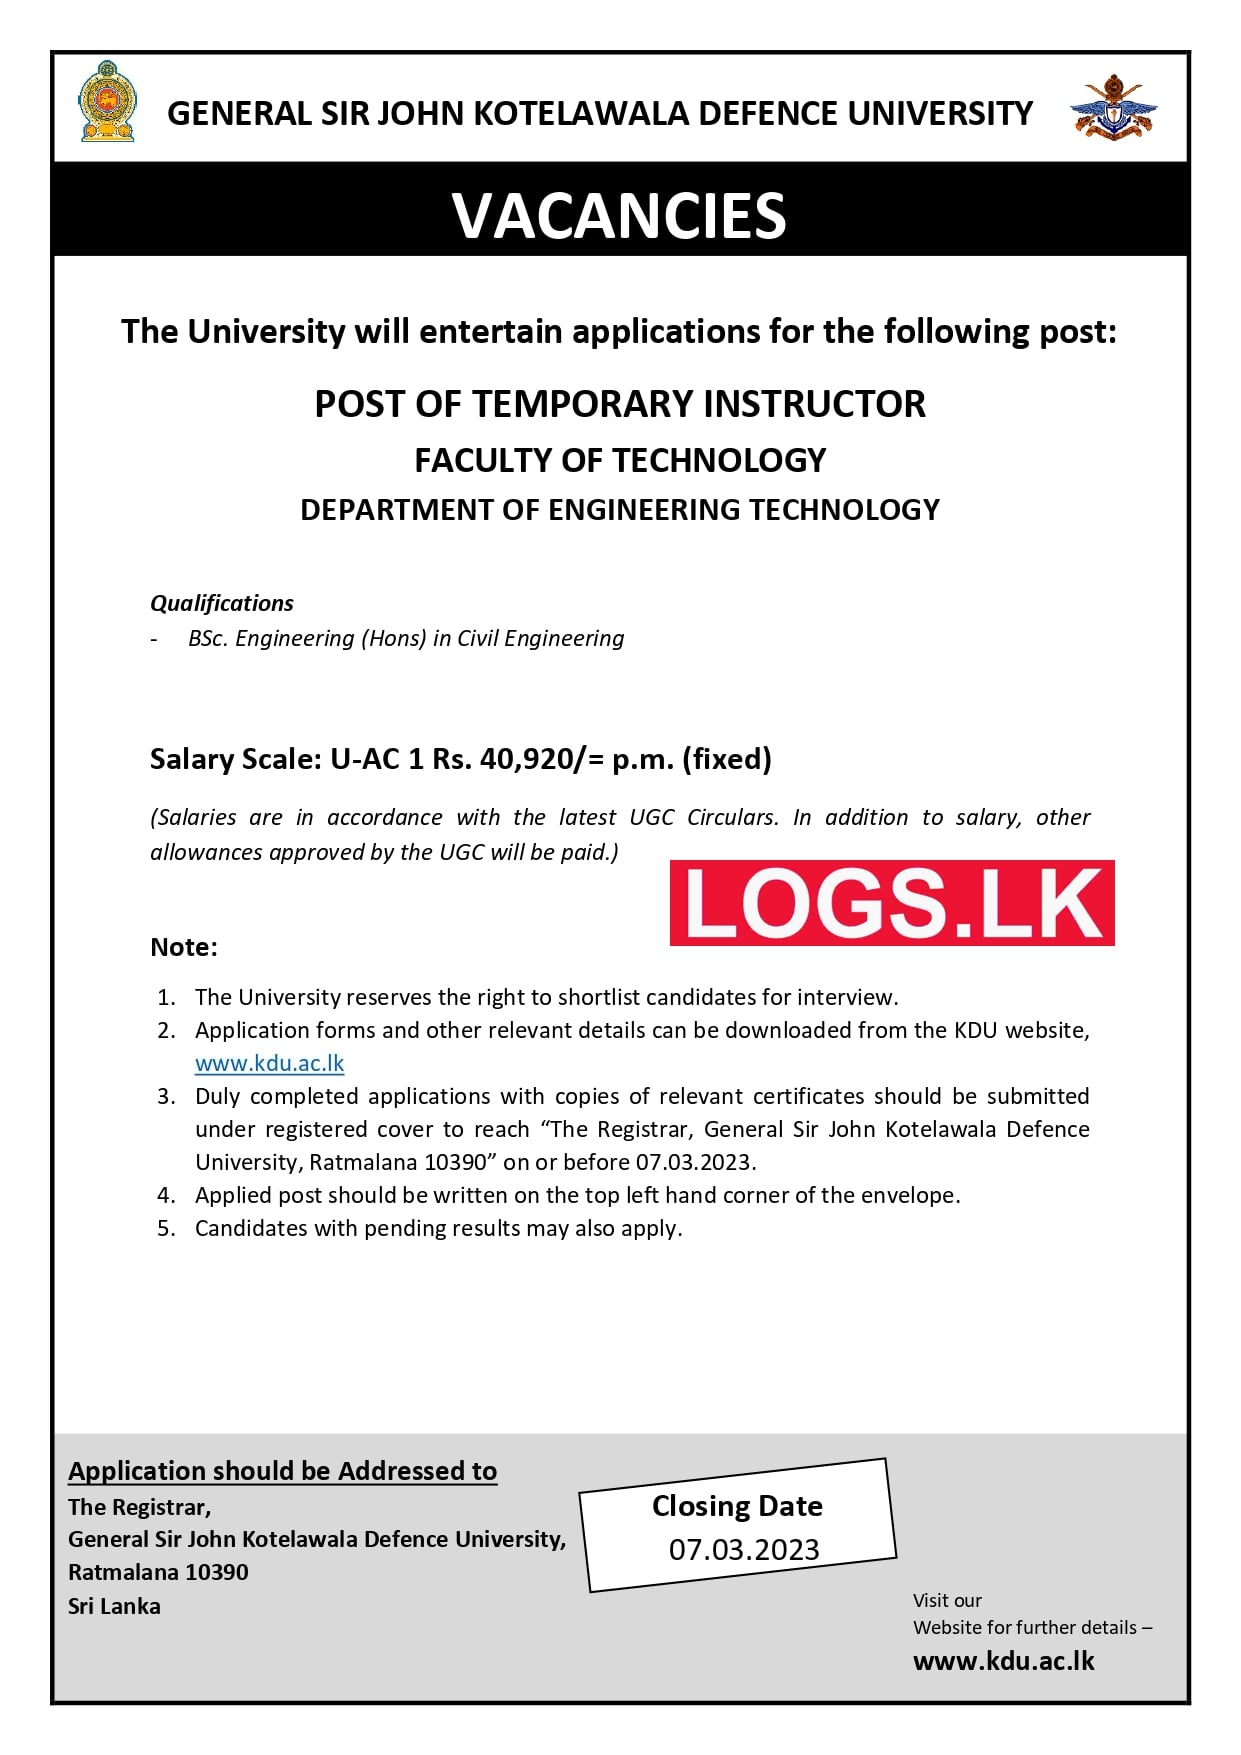 Temporary Instructor - Faculty of Technology KDU Vacancies 2023 Application, Details Download